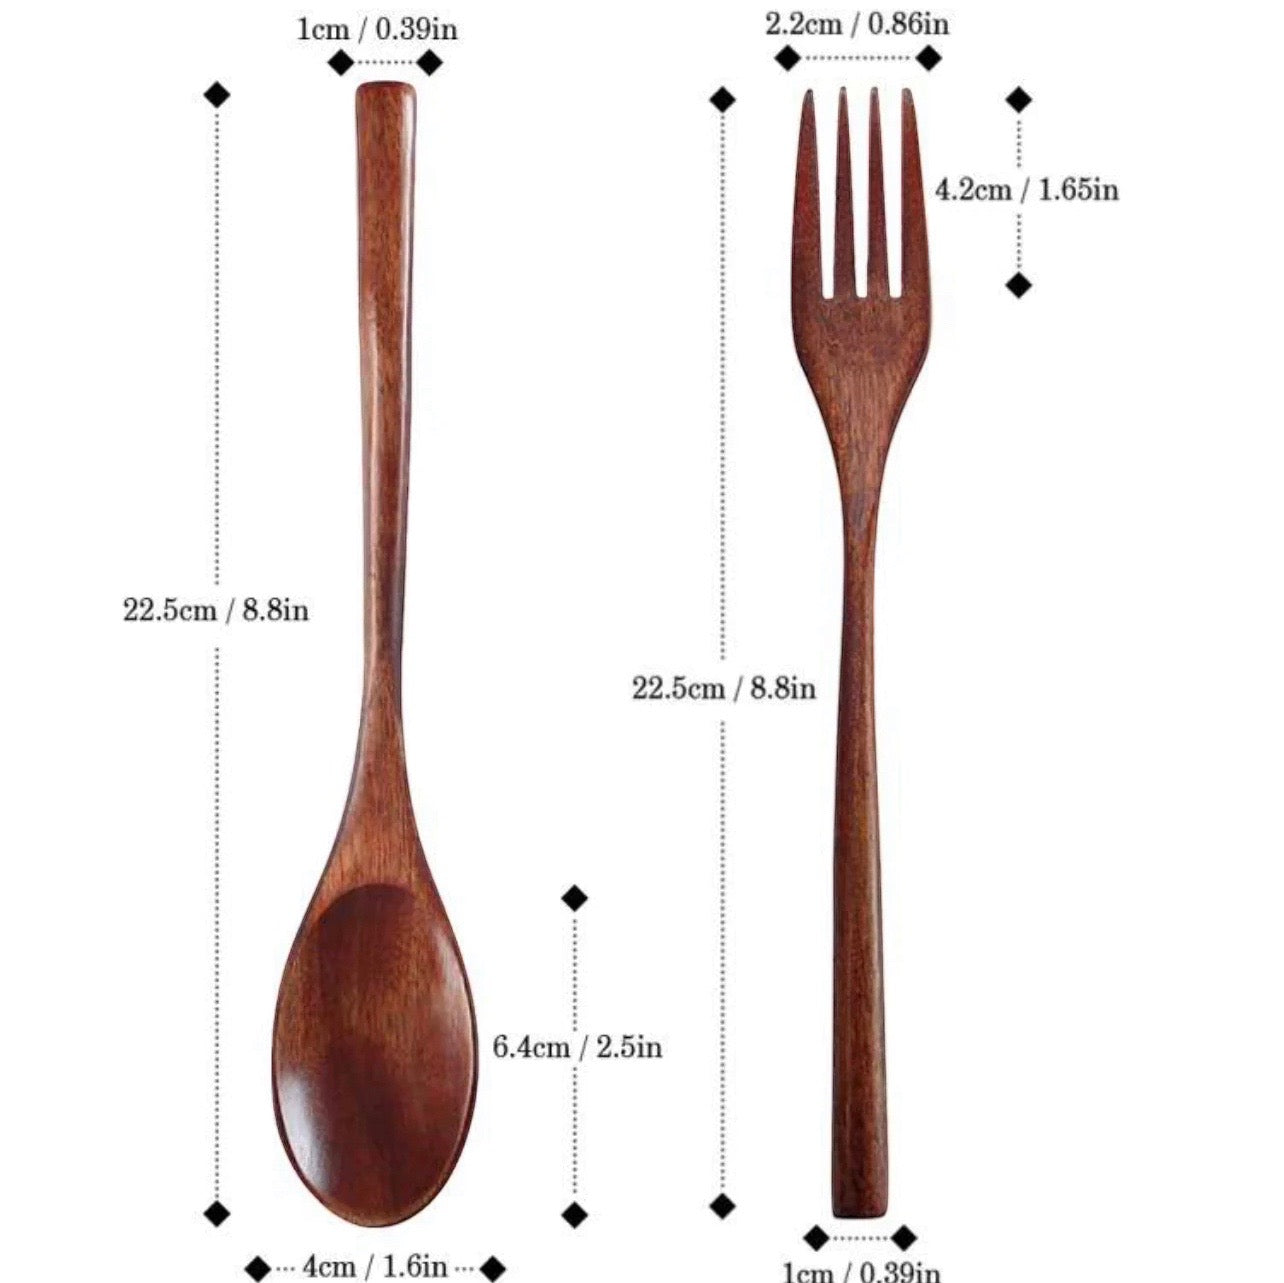 The Utensils: From Eating to Dining